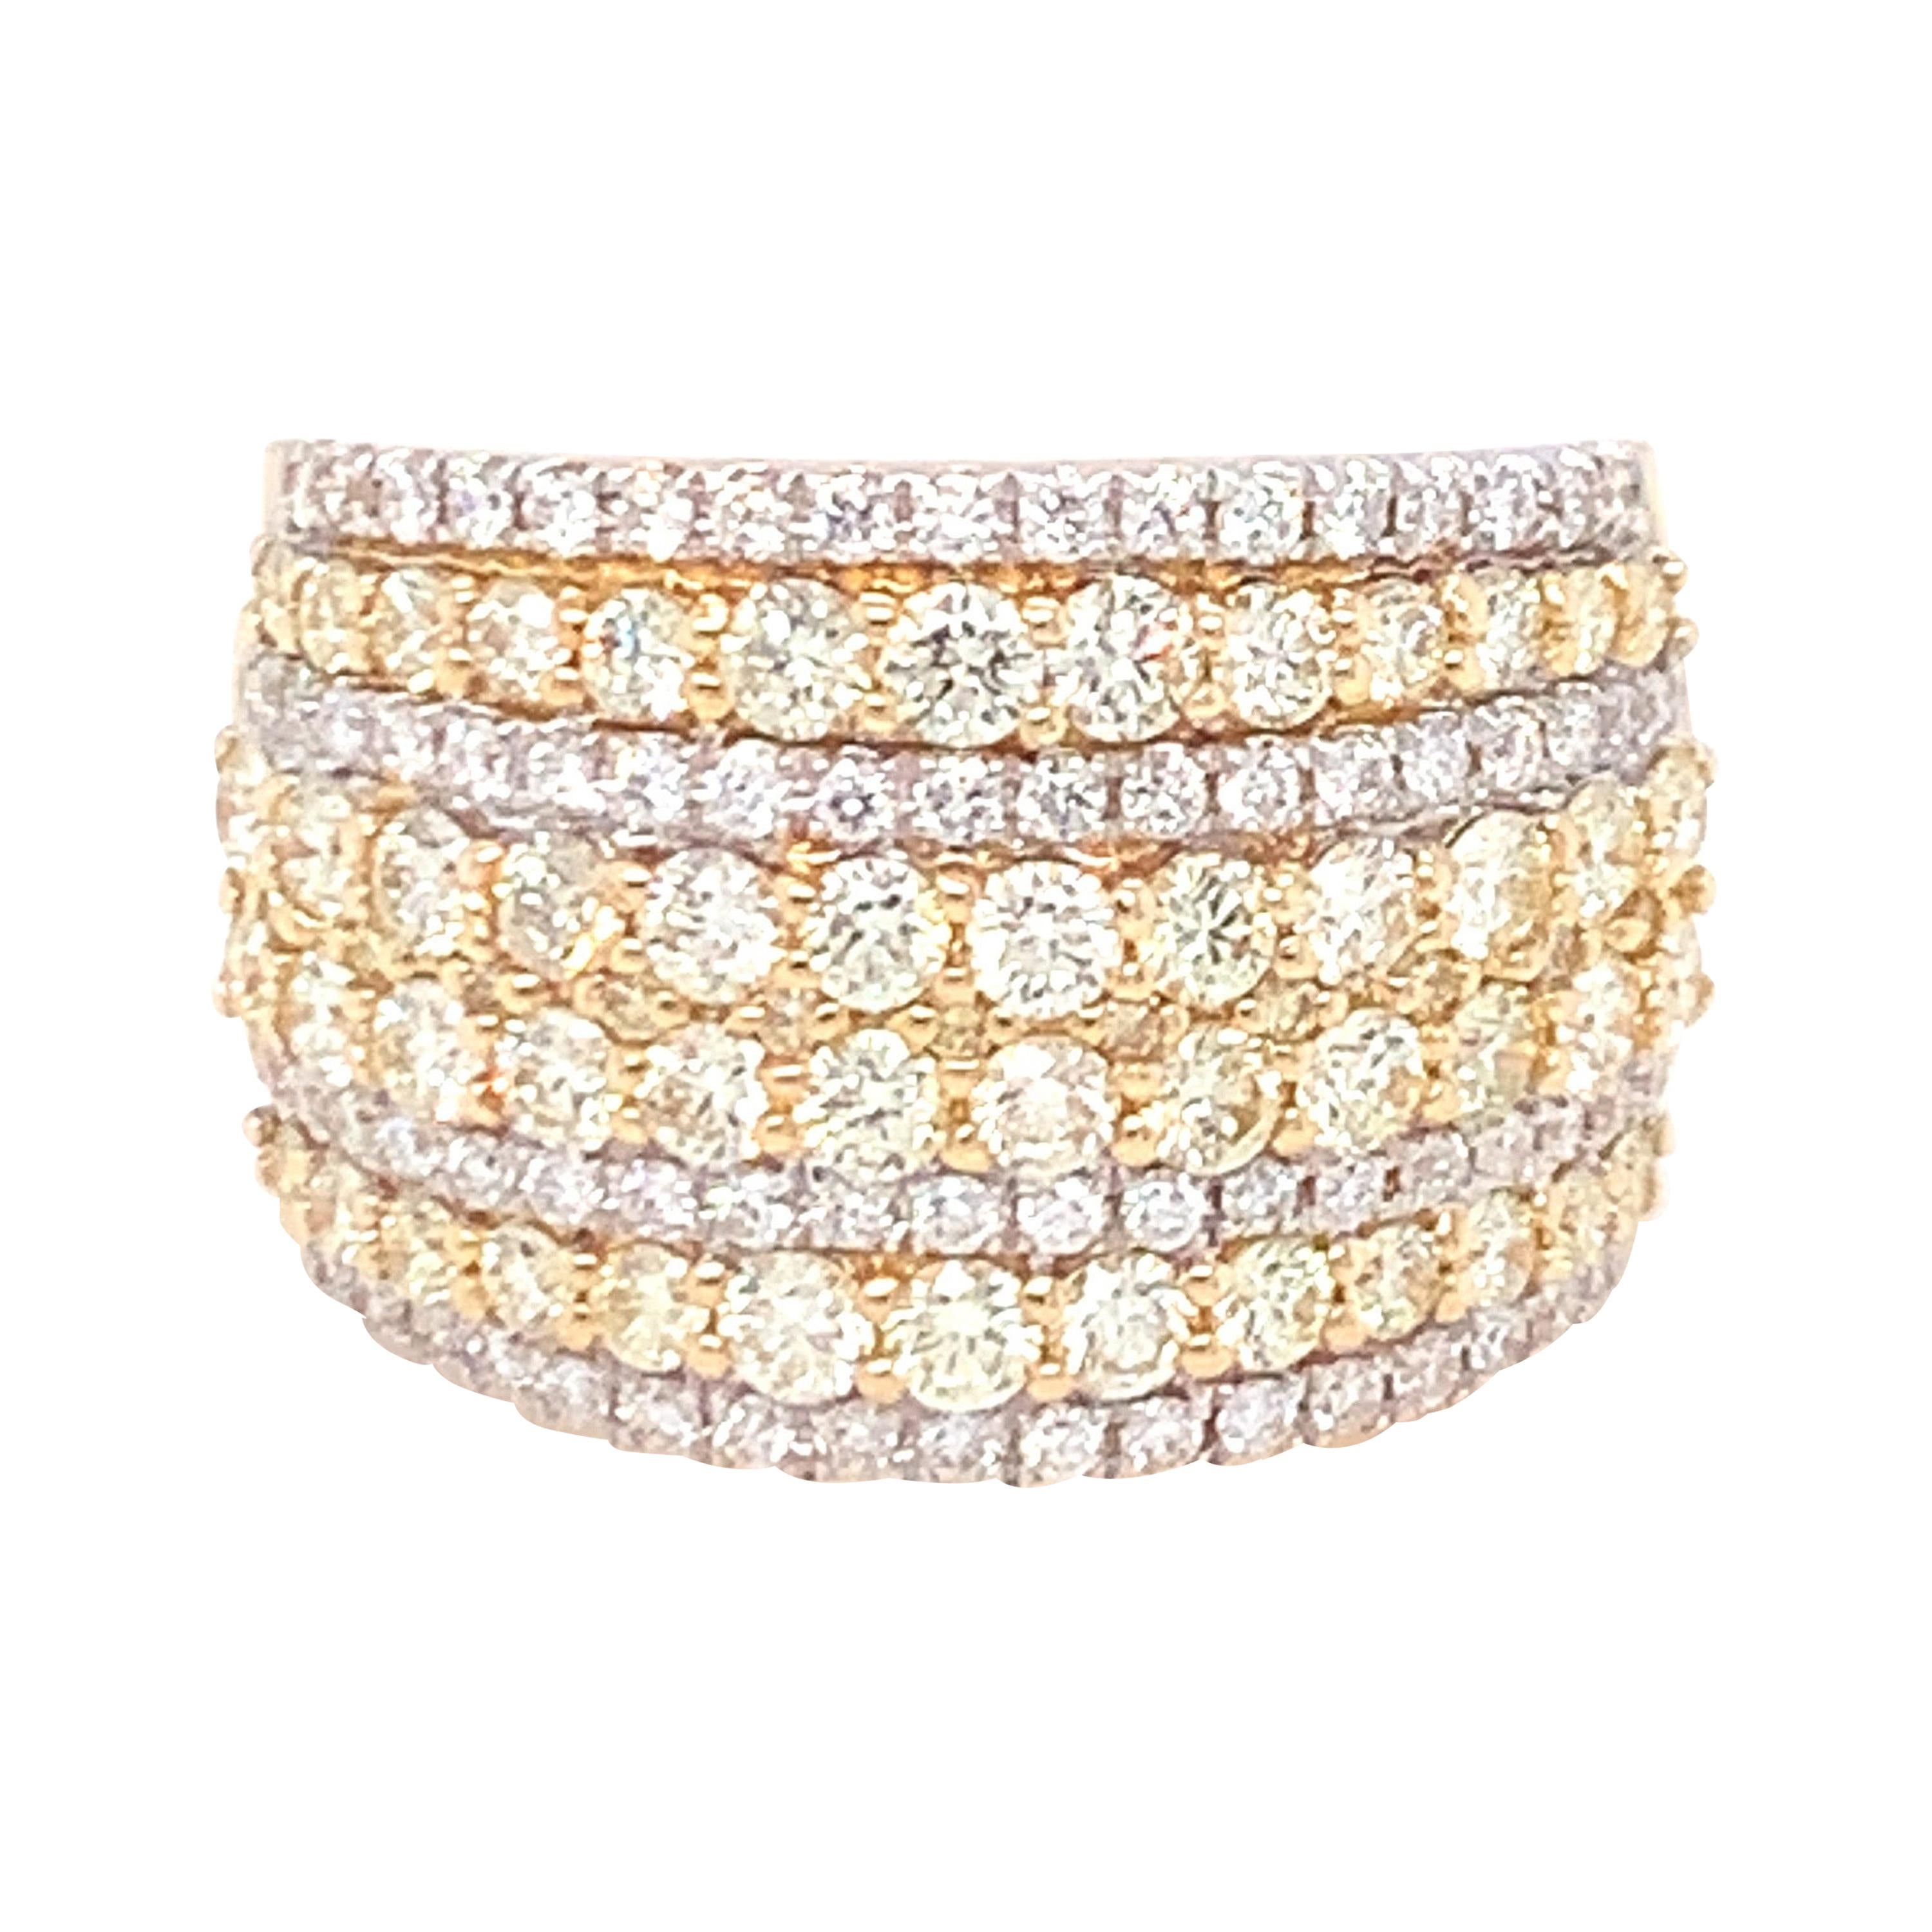 2.08 Carat Diamond Band Ring in 14k Yellow Gold For Sale